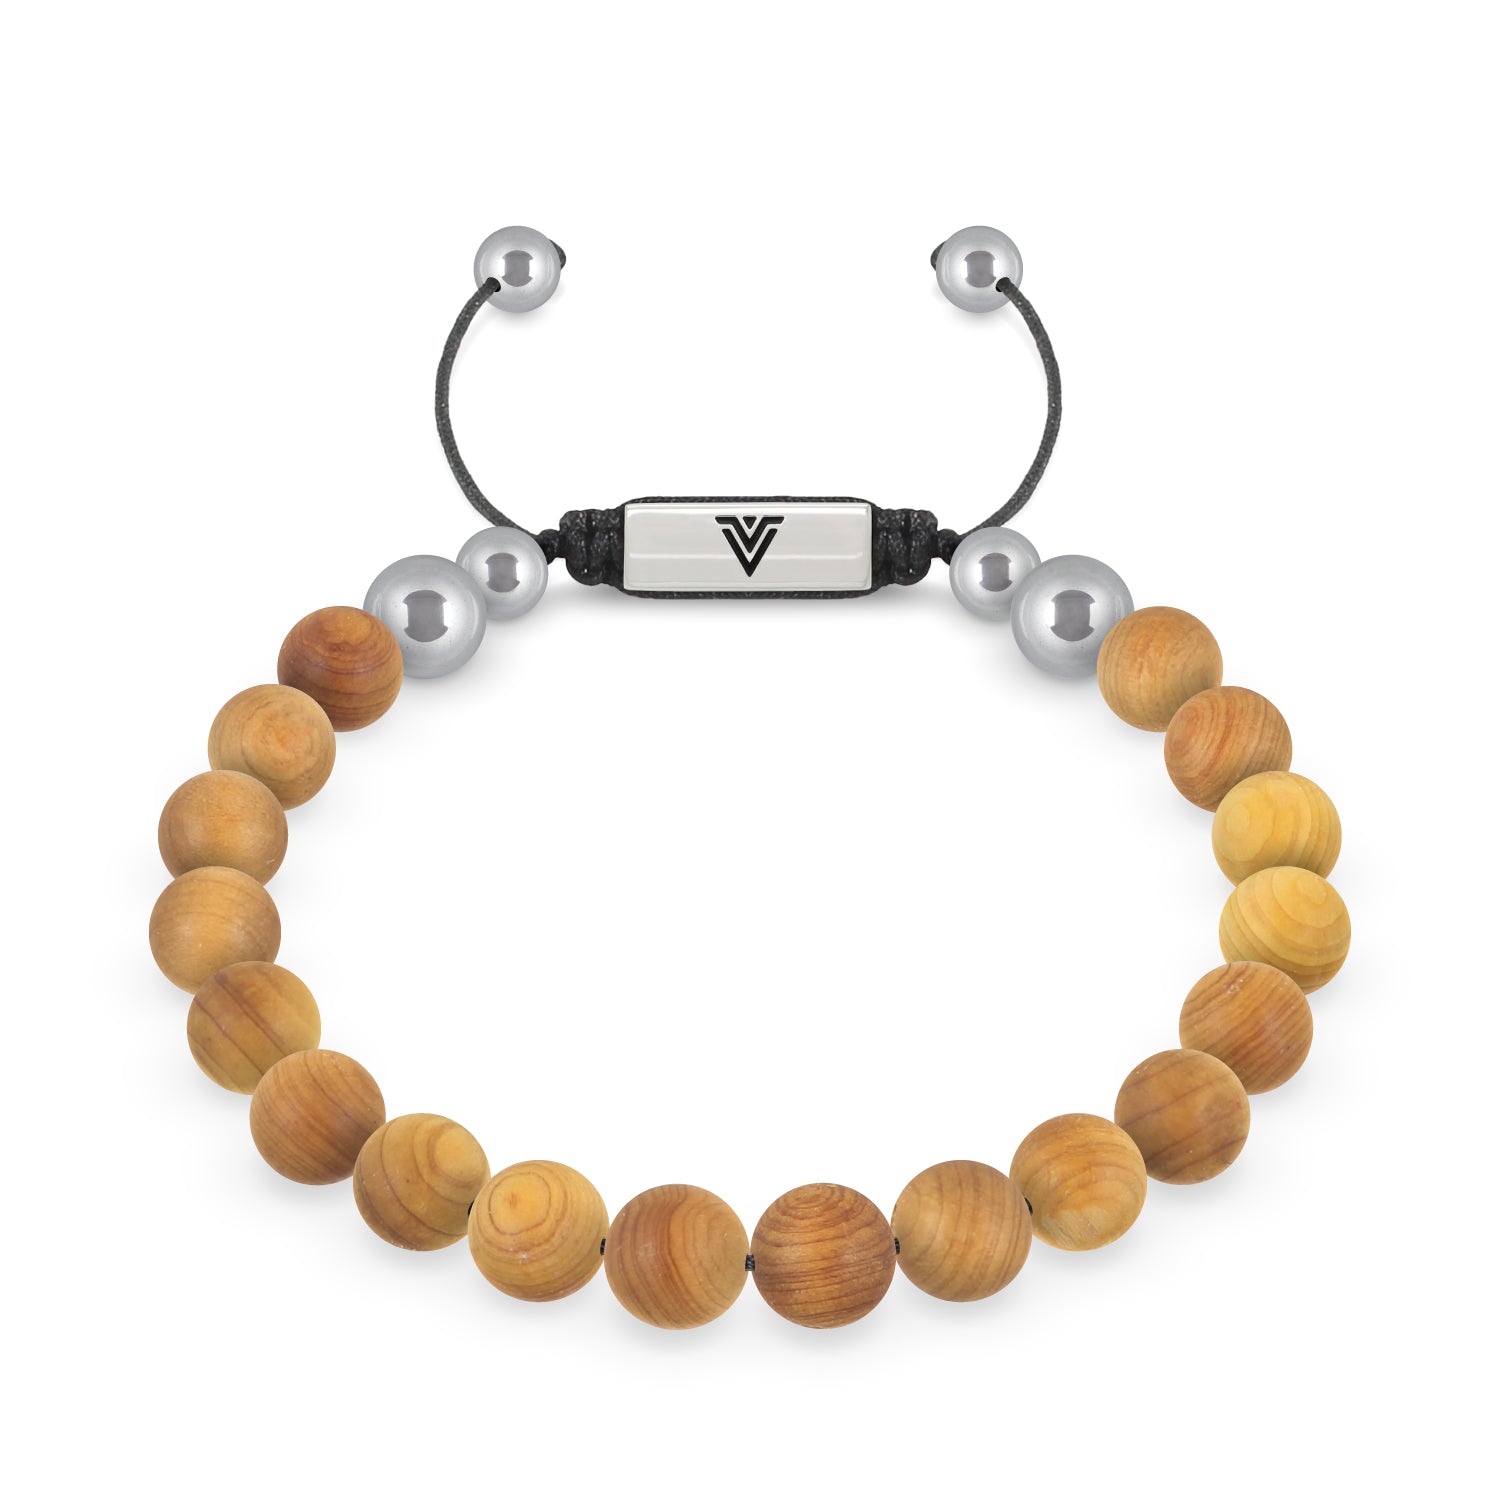 Front view of an 8mm Sandalwood beaded shamballa bracelet with silver stainless steel logo bead made by Voltlin